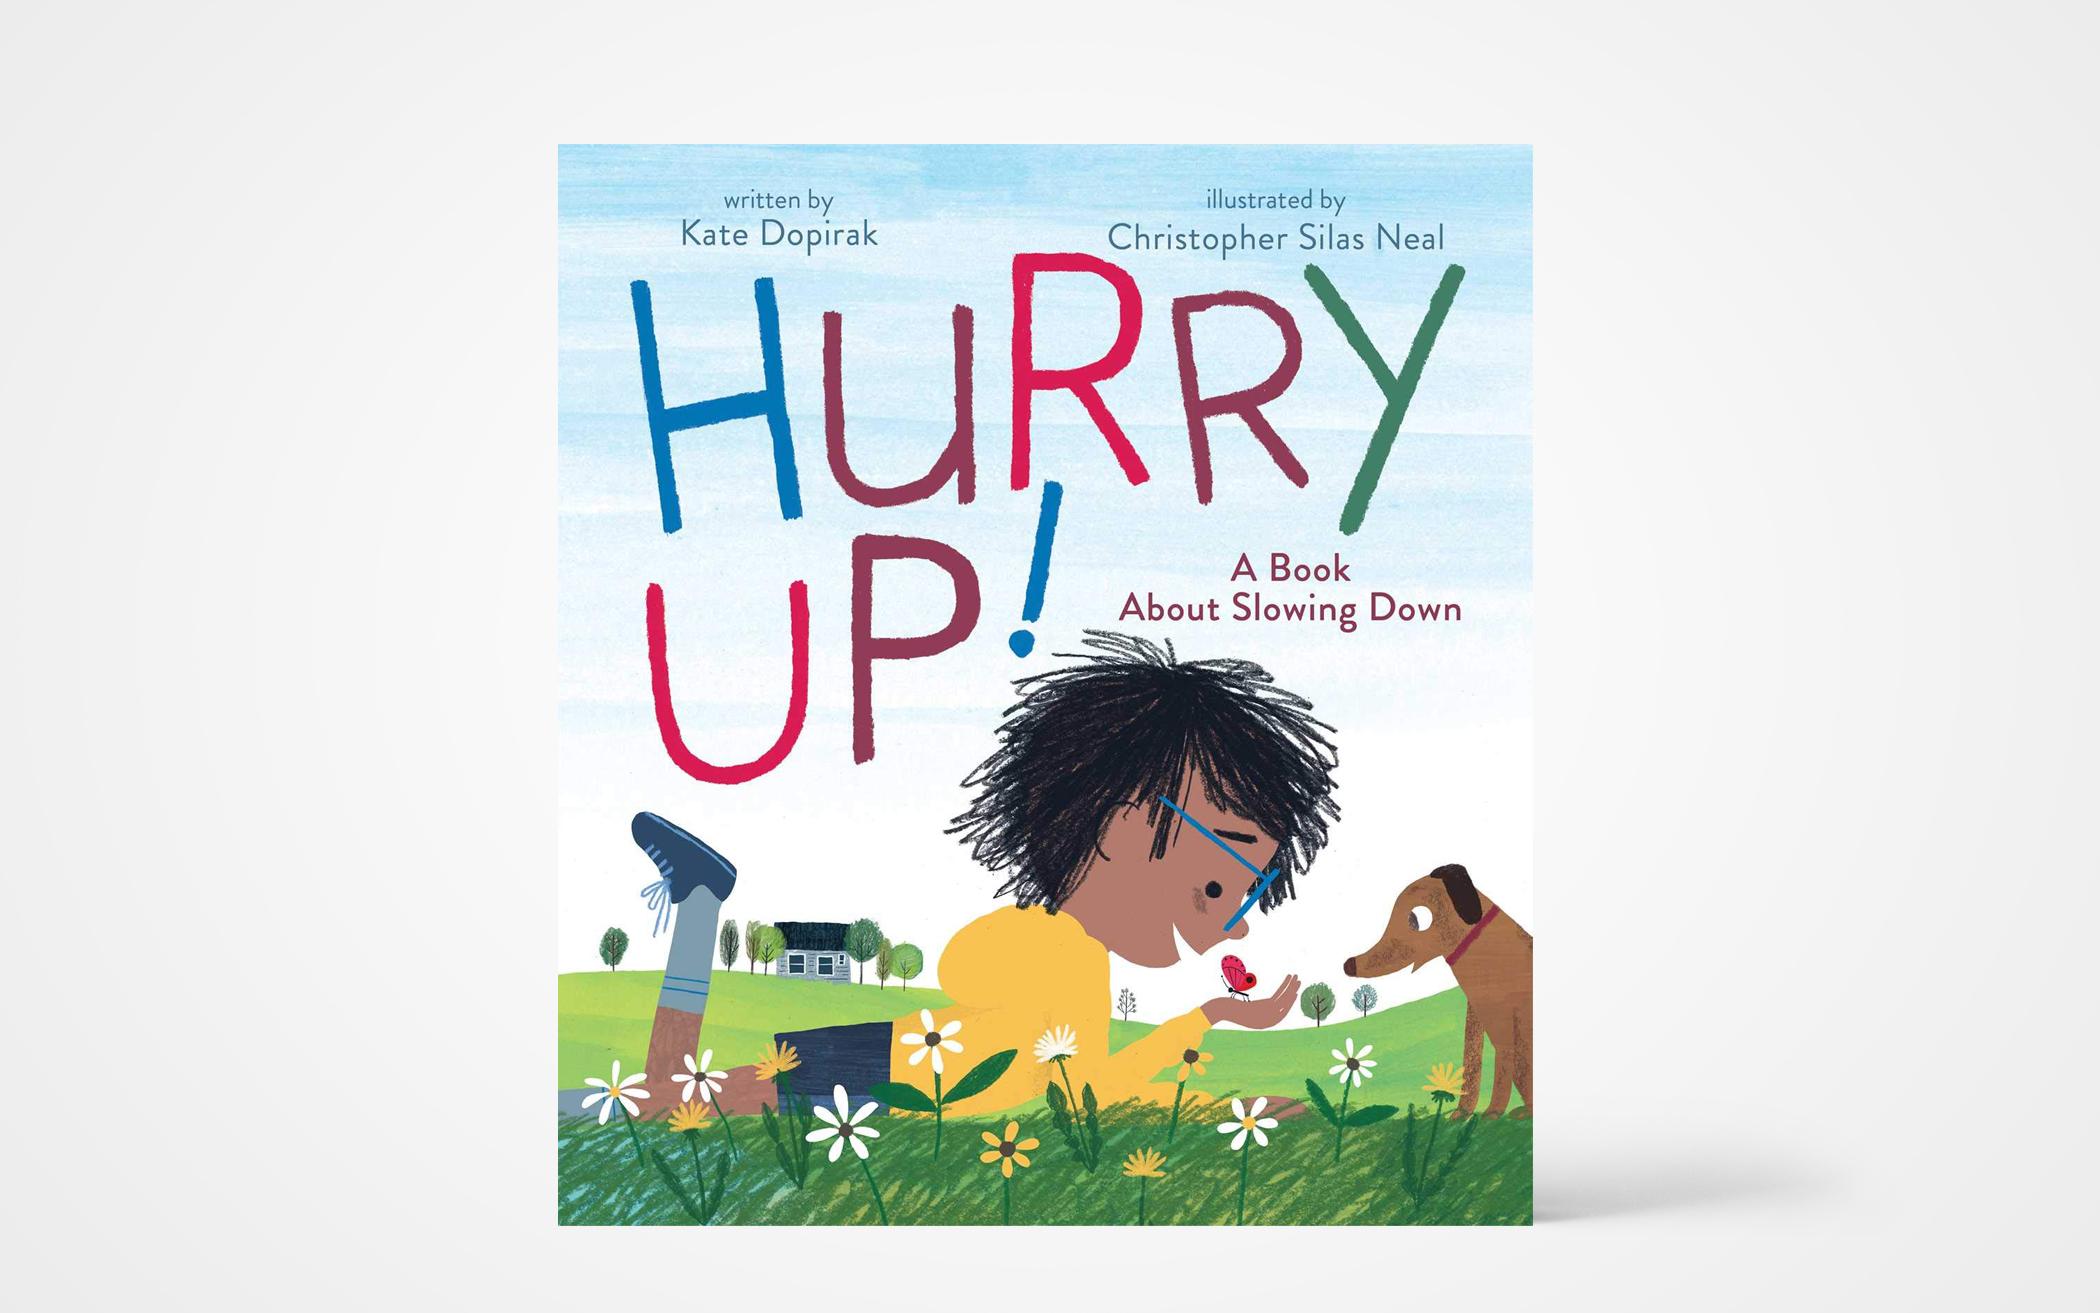 Hurry Up!  A Book About Slowing Down